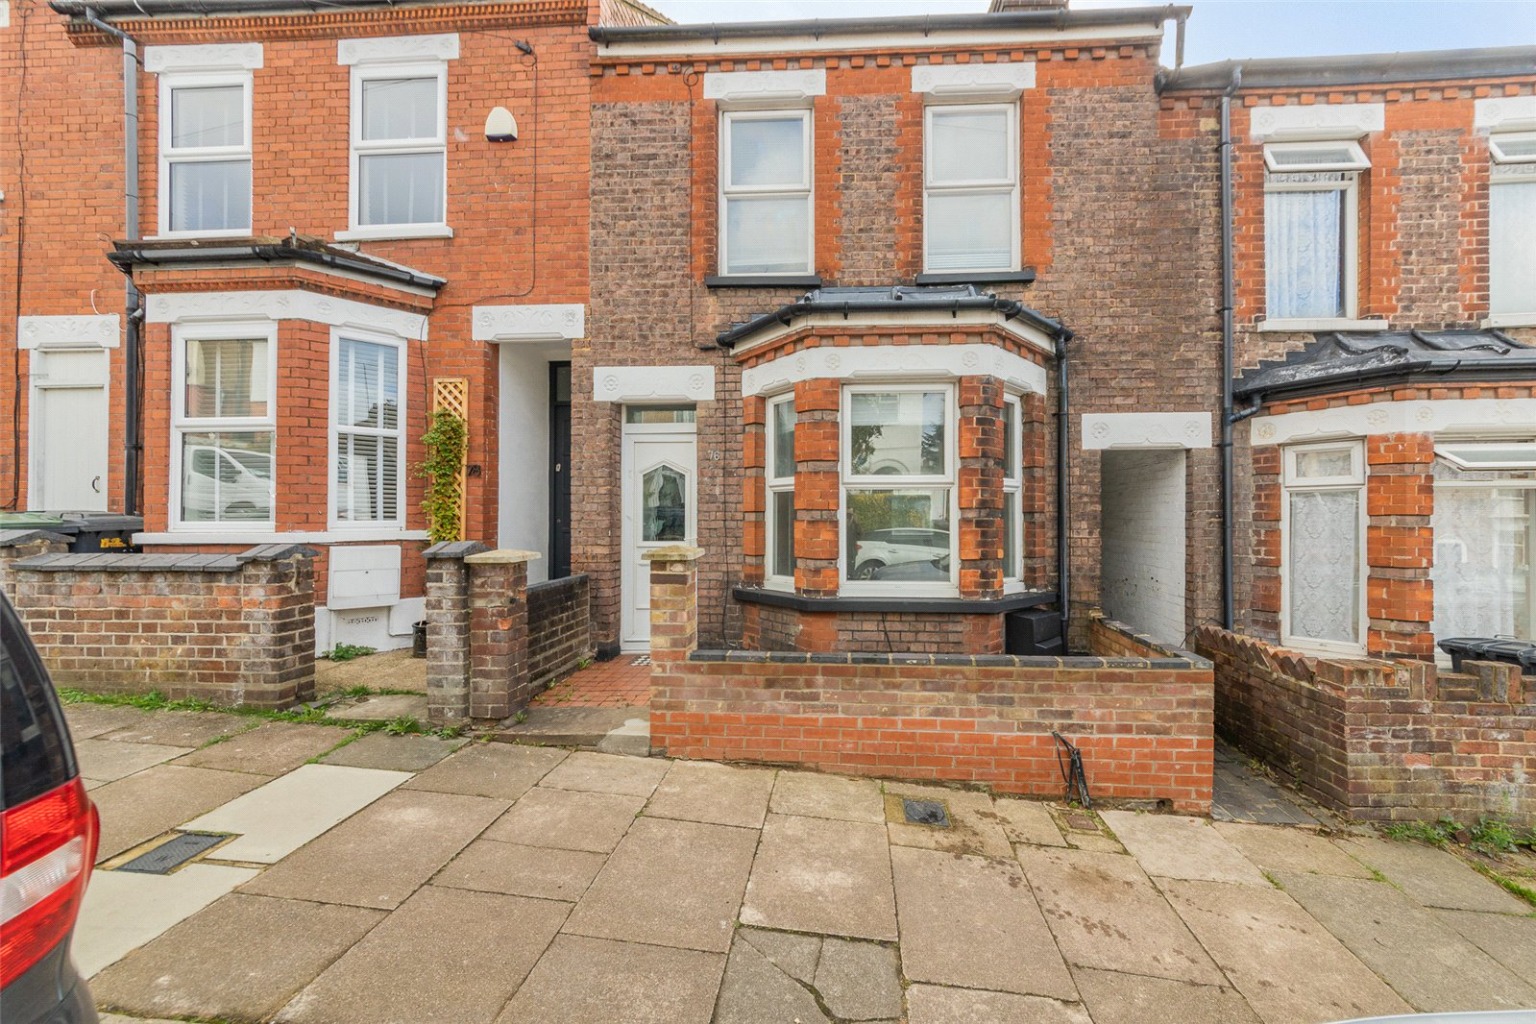 3 bed terraced house for sale in Talbot Road, Luton - Property Image 1